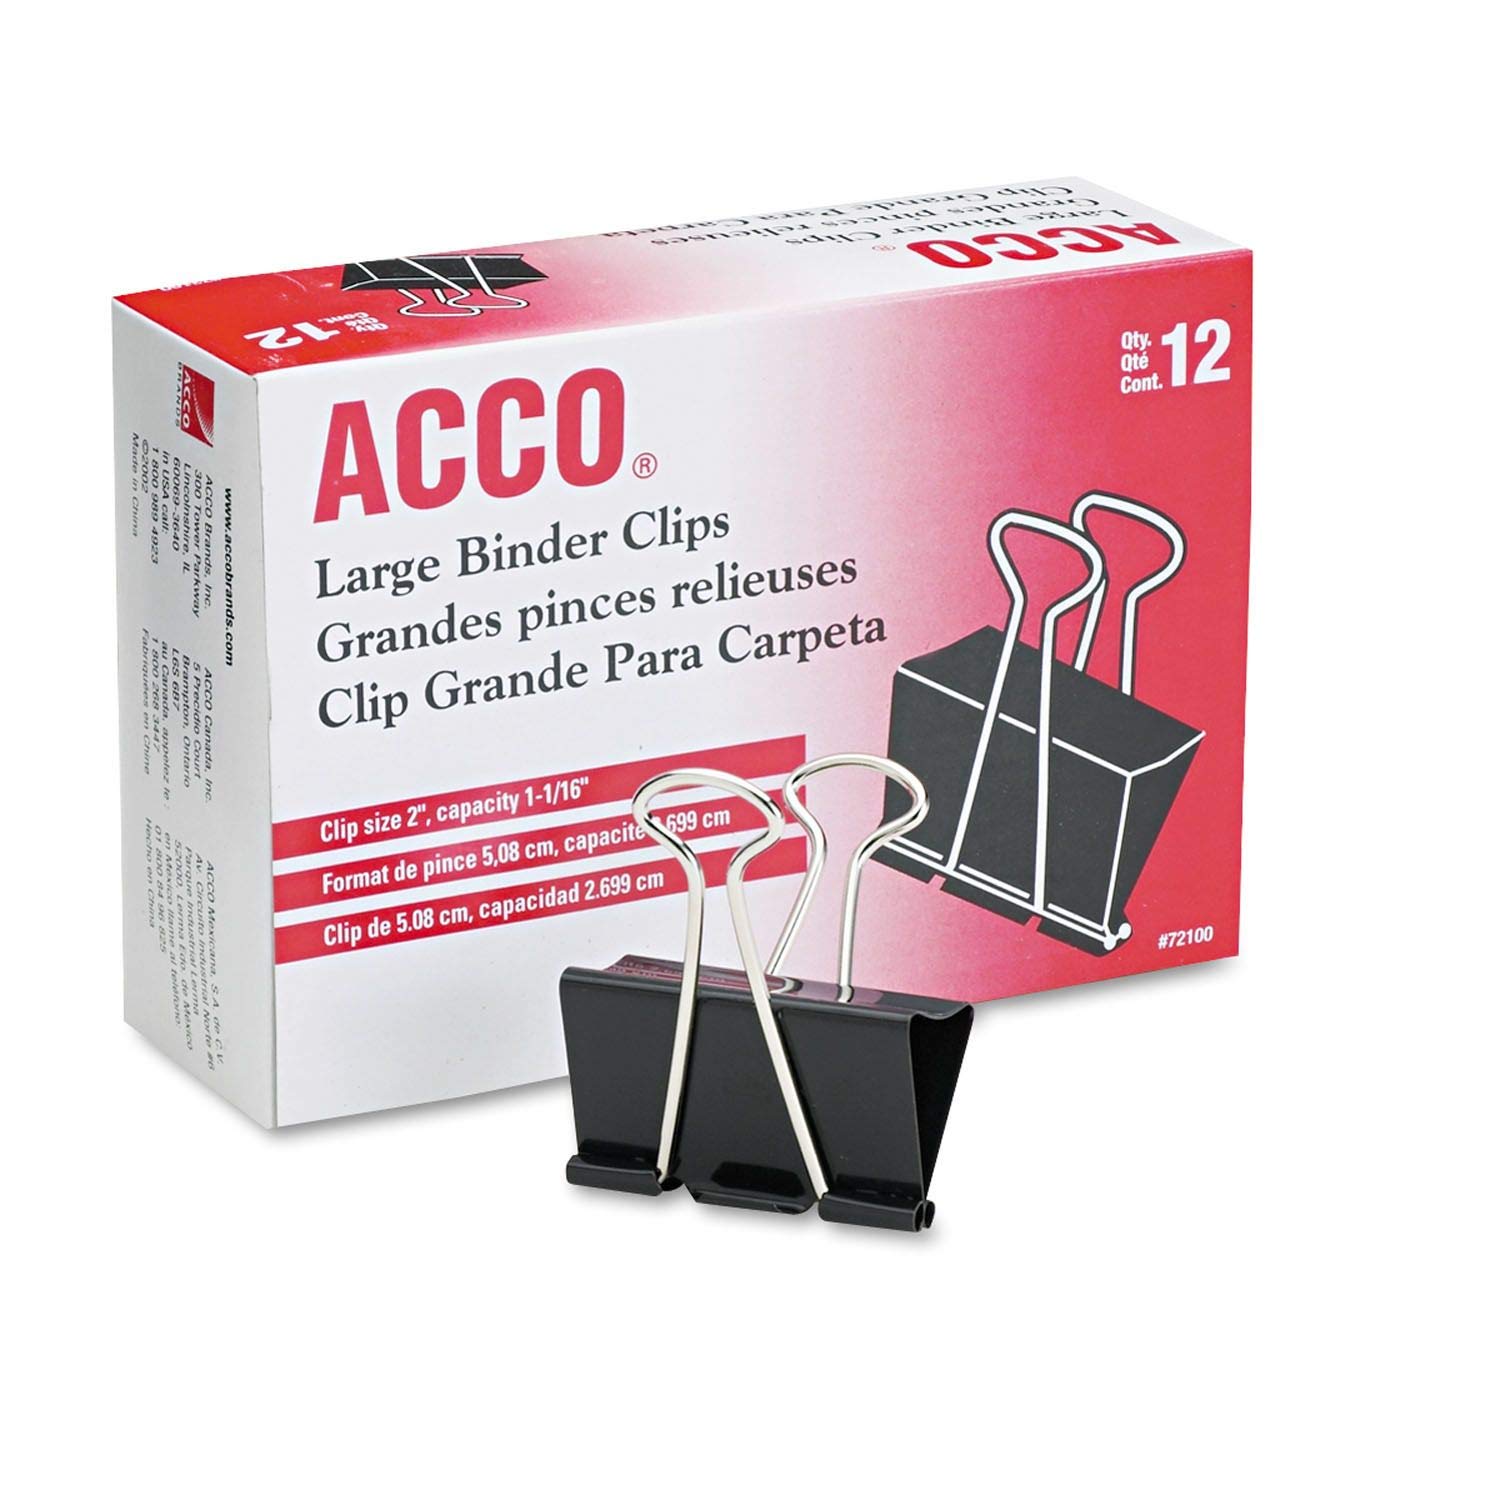 ACCO Brands ACCO Binder Clips, Large, 2 Boxes, 12 Clips/Box (72102), Black